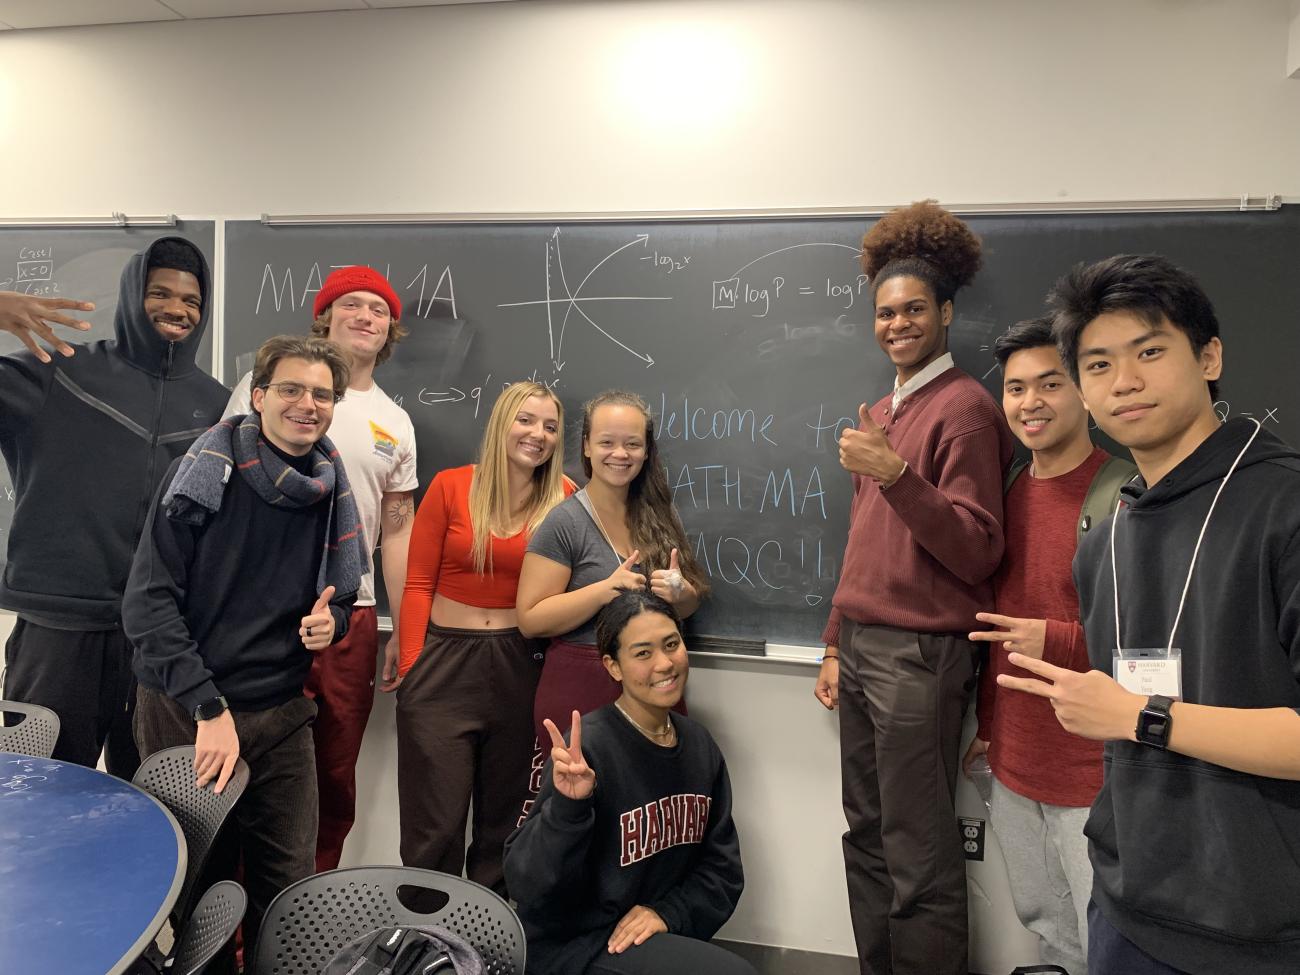 Students and course assistants gathered around a chalkboard, posing for a picture